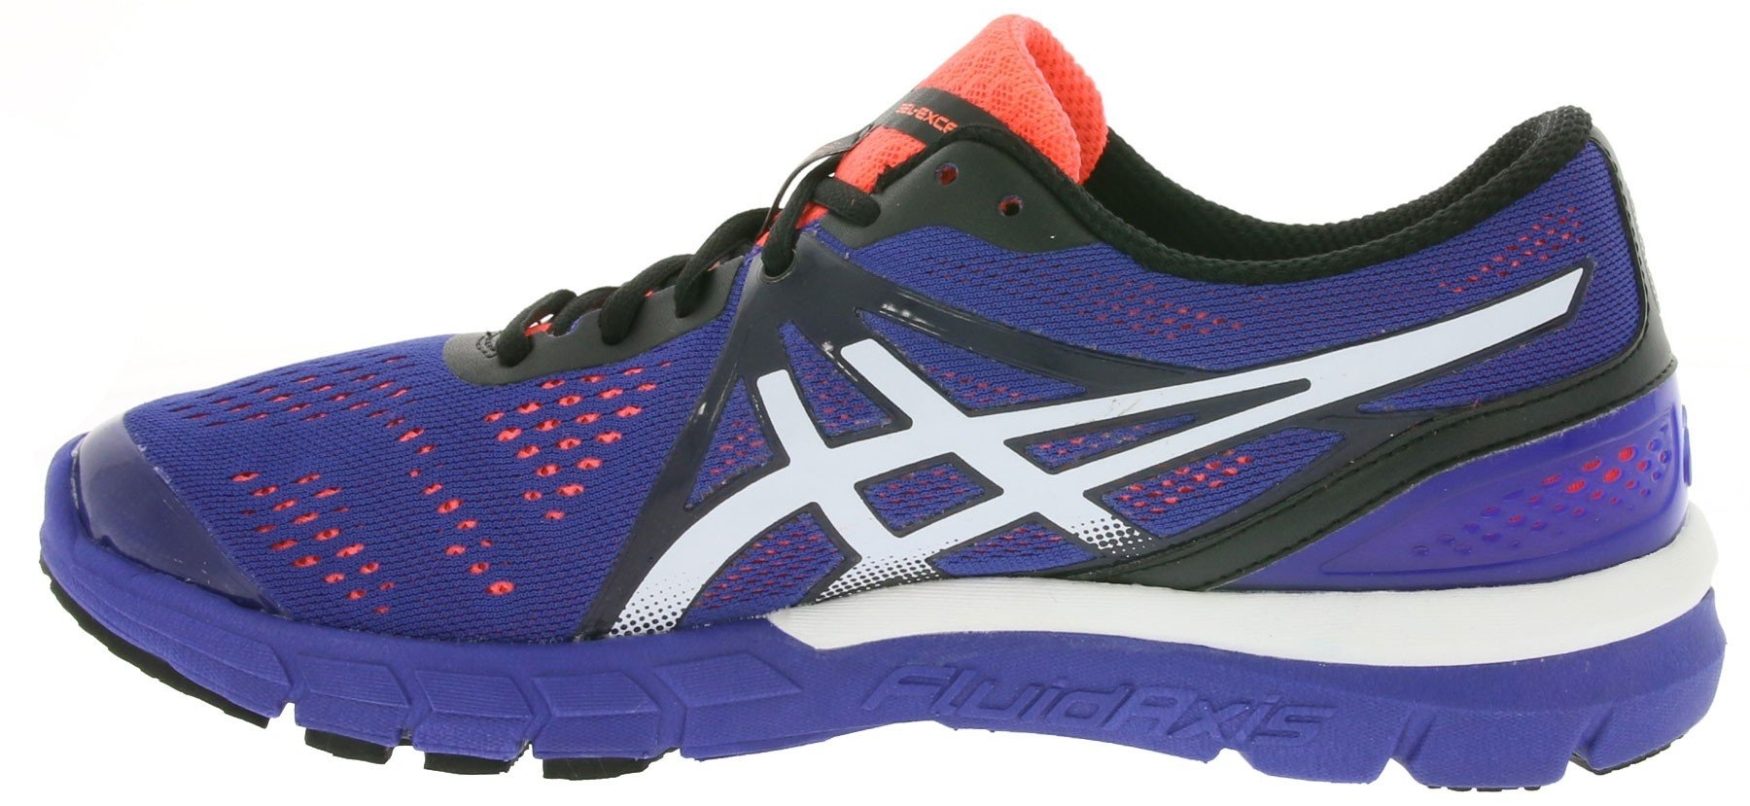 Only £60 + Review of Asics Gel Excel33 3 | RunRepeat